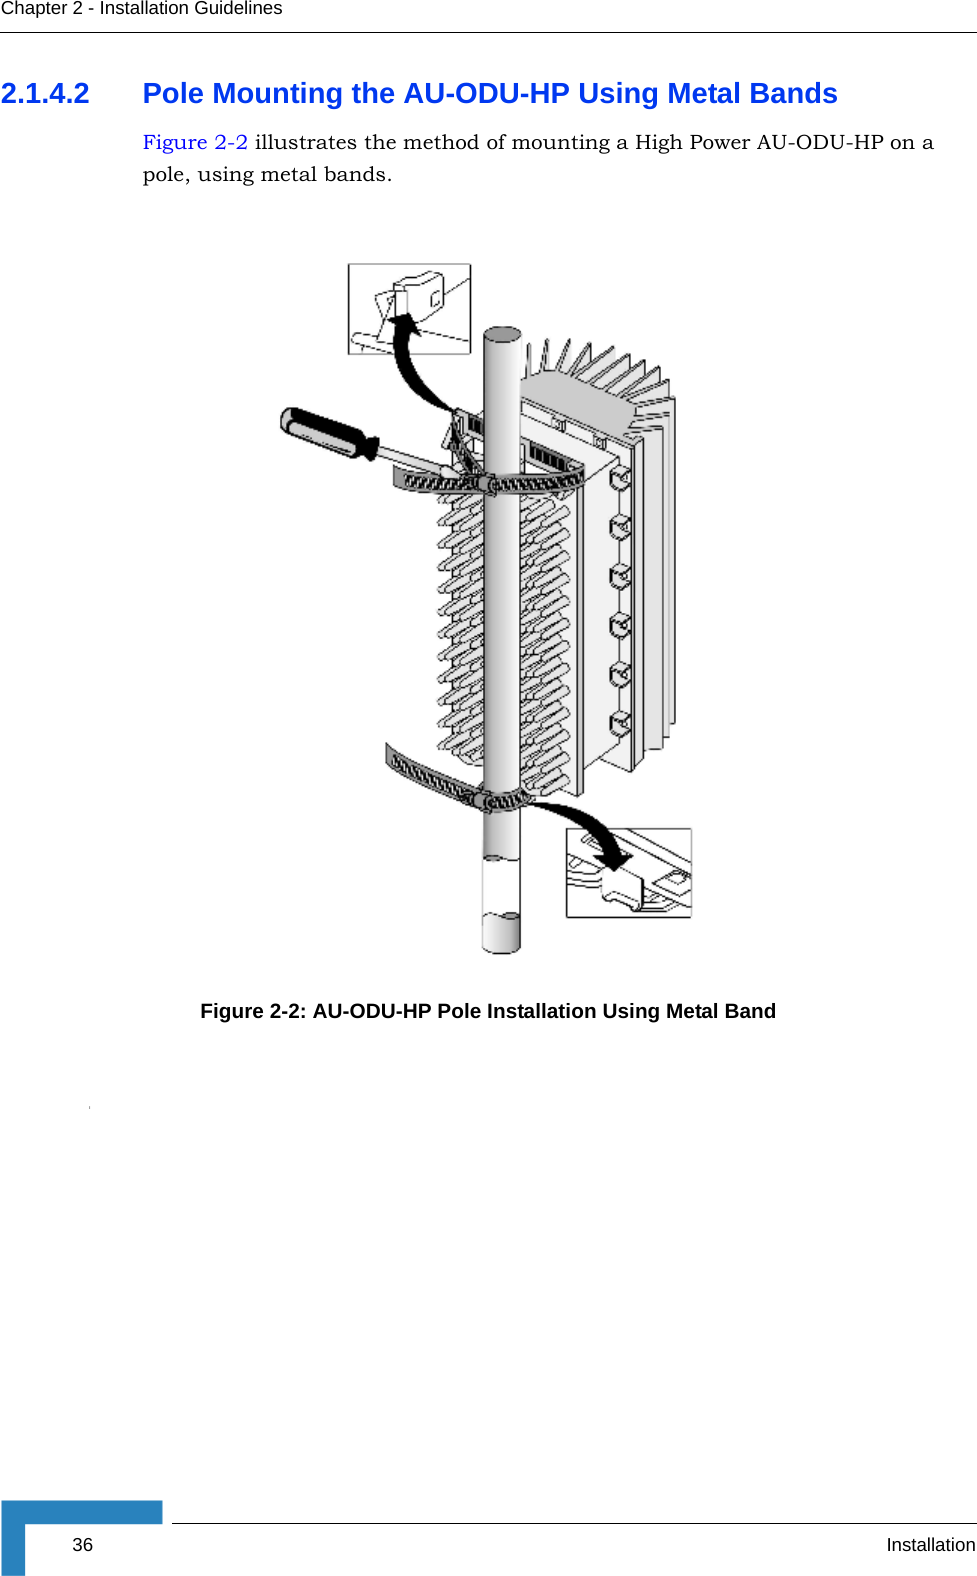 36 InstallationChapter 2 - Installation Guidelines2.1.4.2 Pole Mounting the AU-ODU-HP Using Metal BandsFigure 2-2 illustrates the method of mounting a High Power AU-ODU-HP on a pole, using metal bands.Figure 2-2: AU-ODU-HP Pole Installation Using Metal BandI